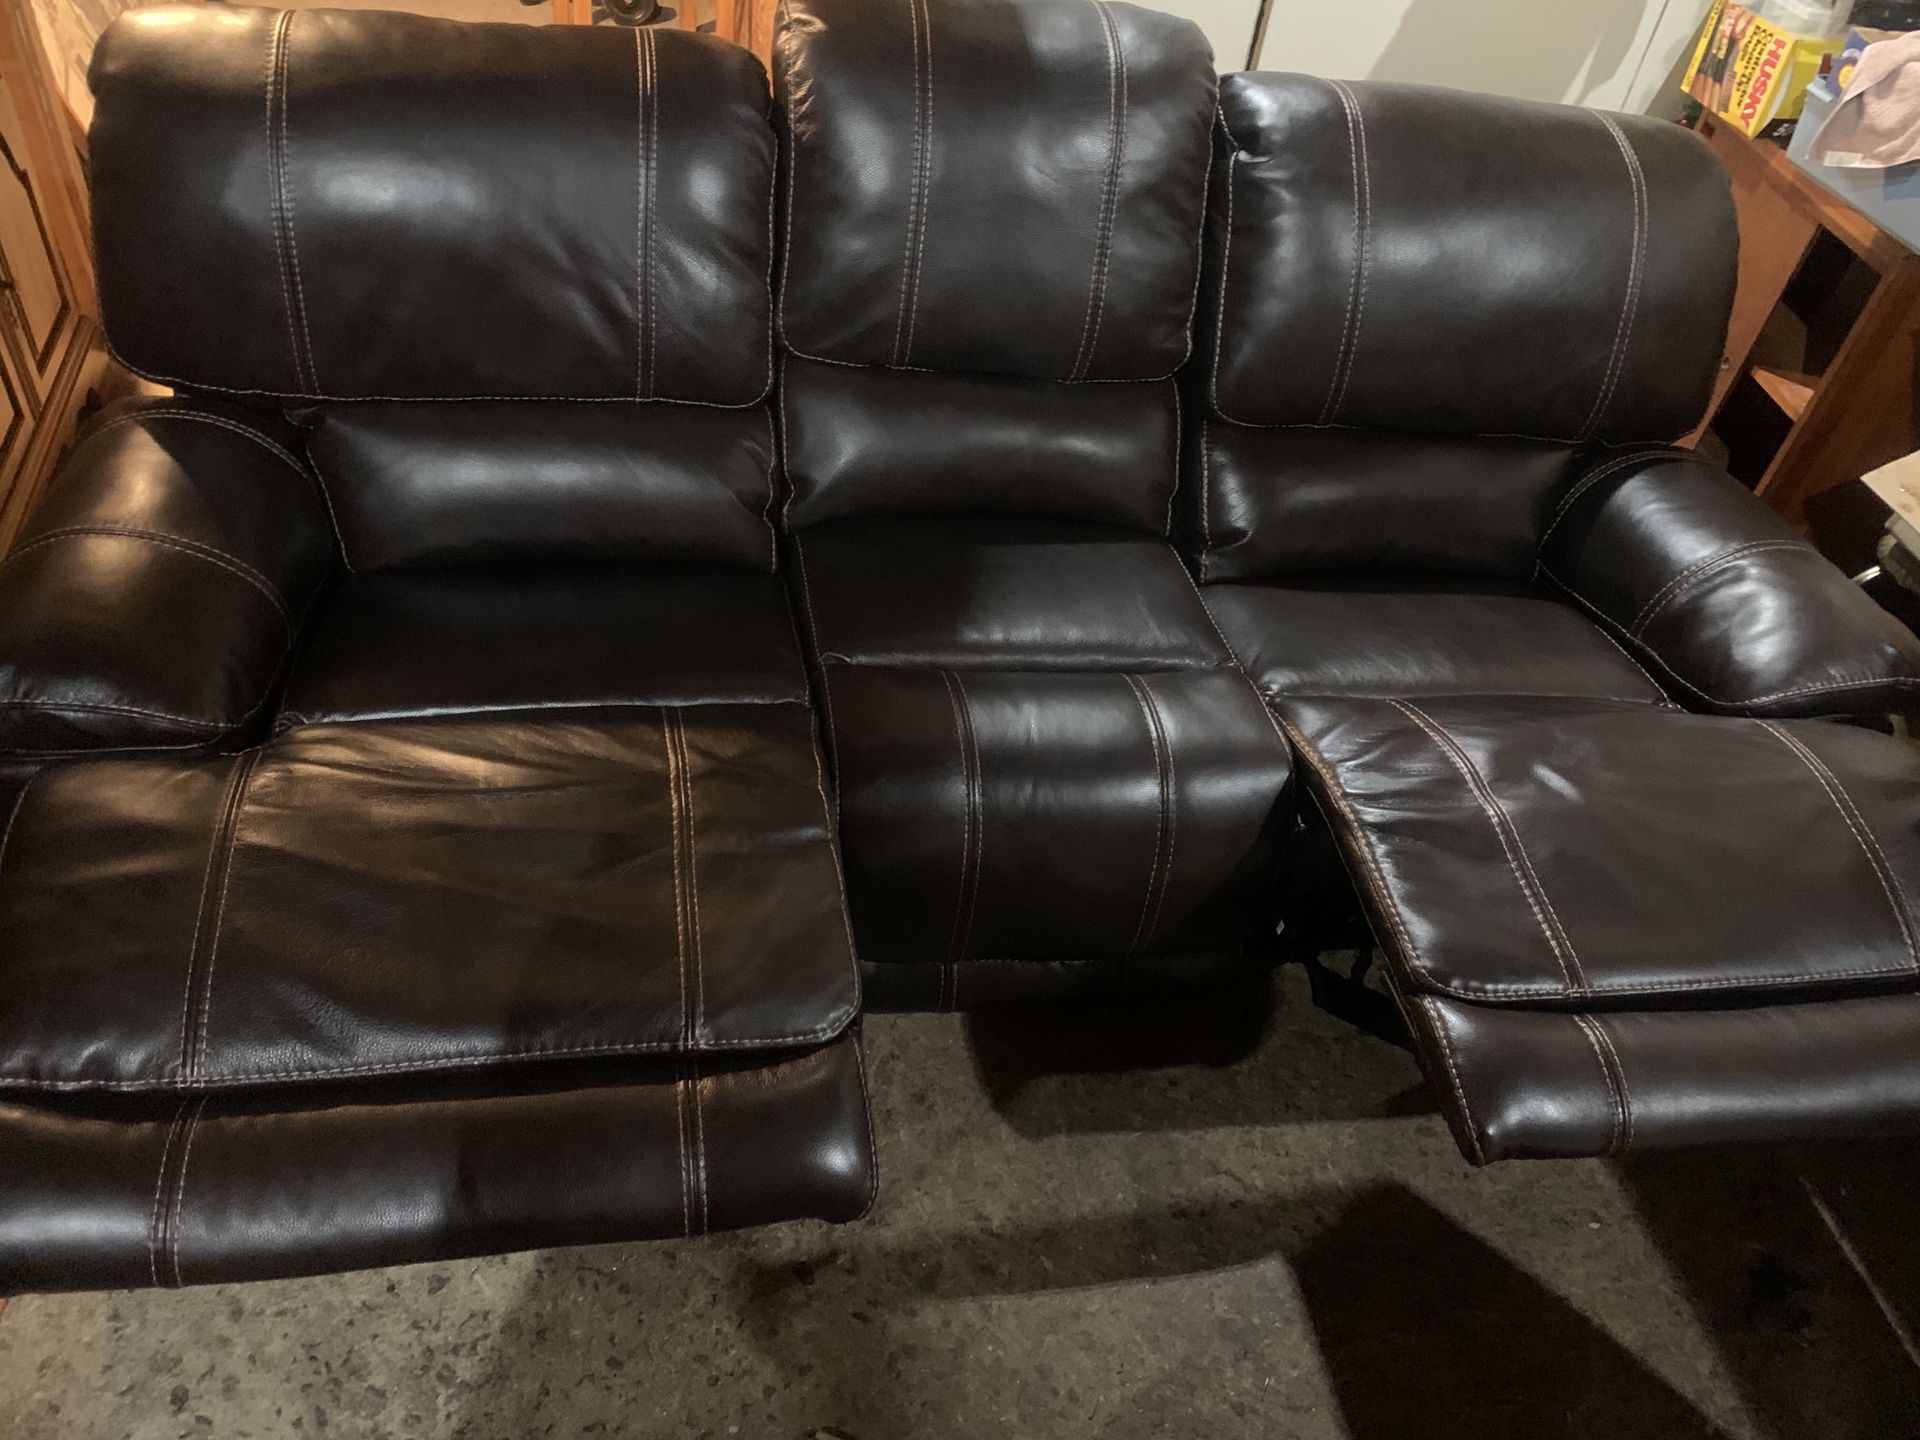 New, not used leather power reclining couch with USB